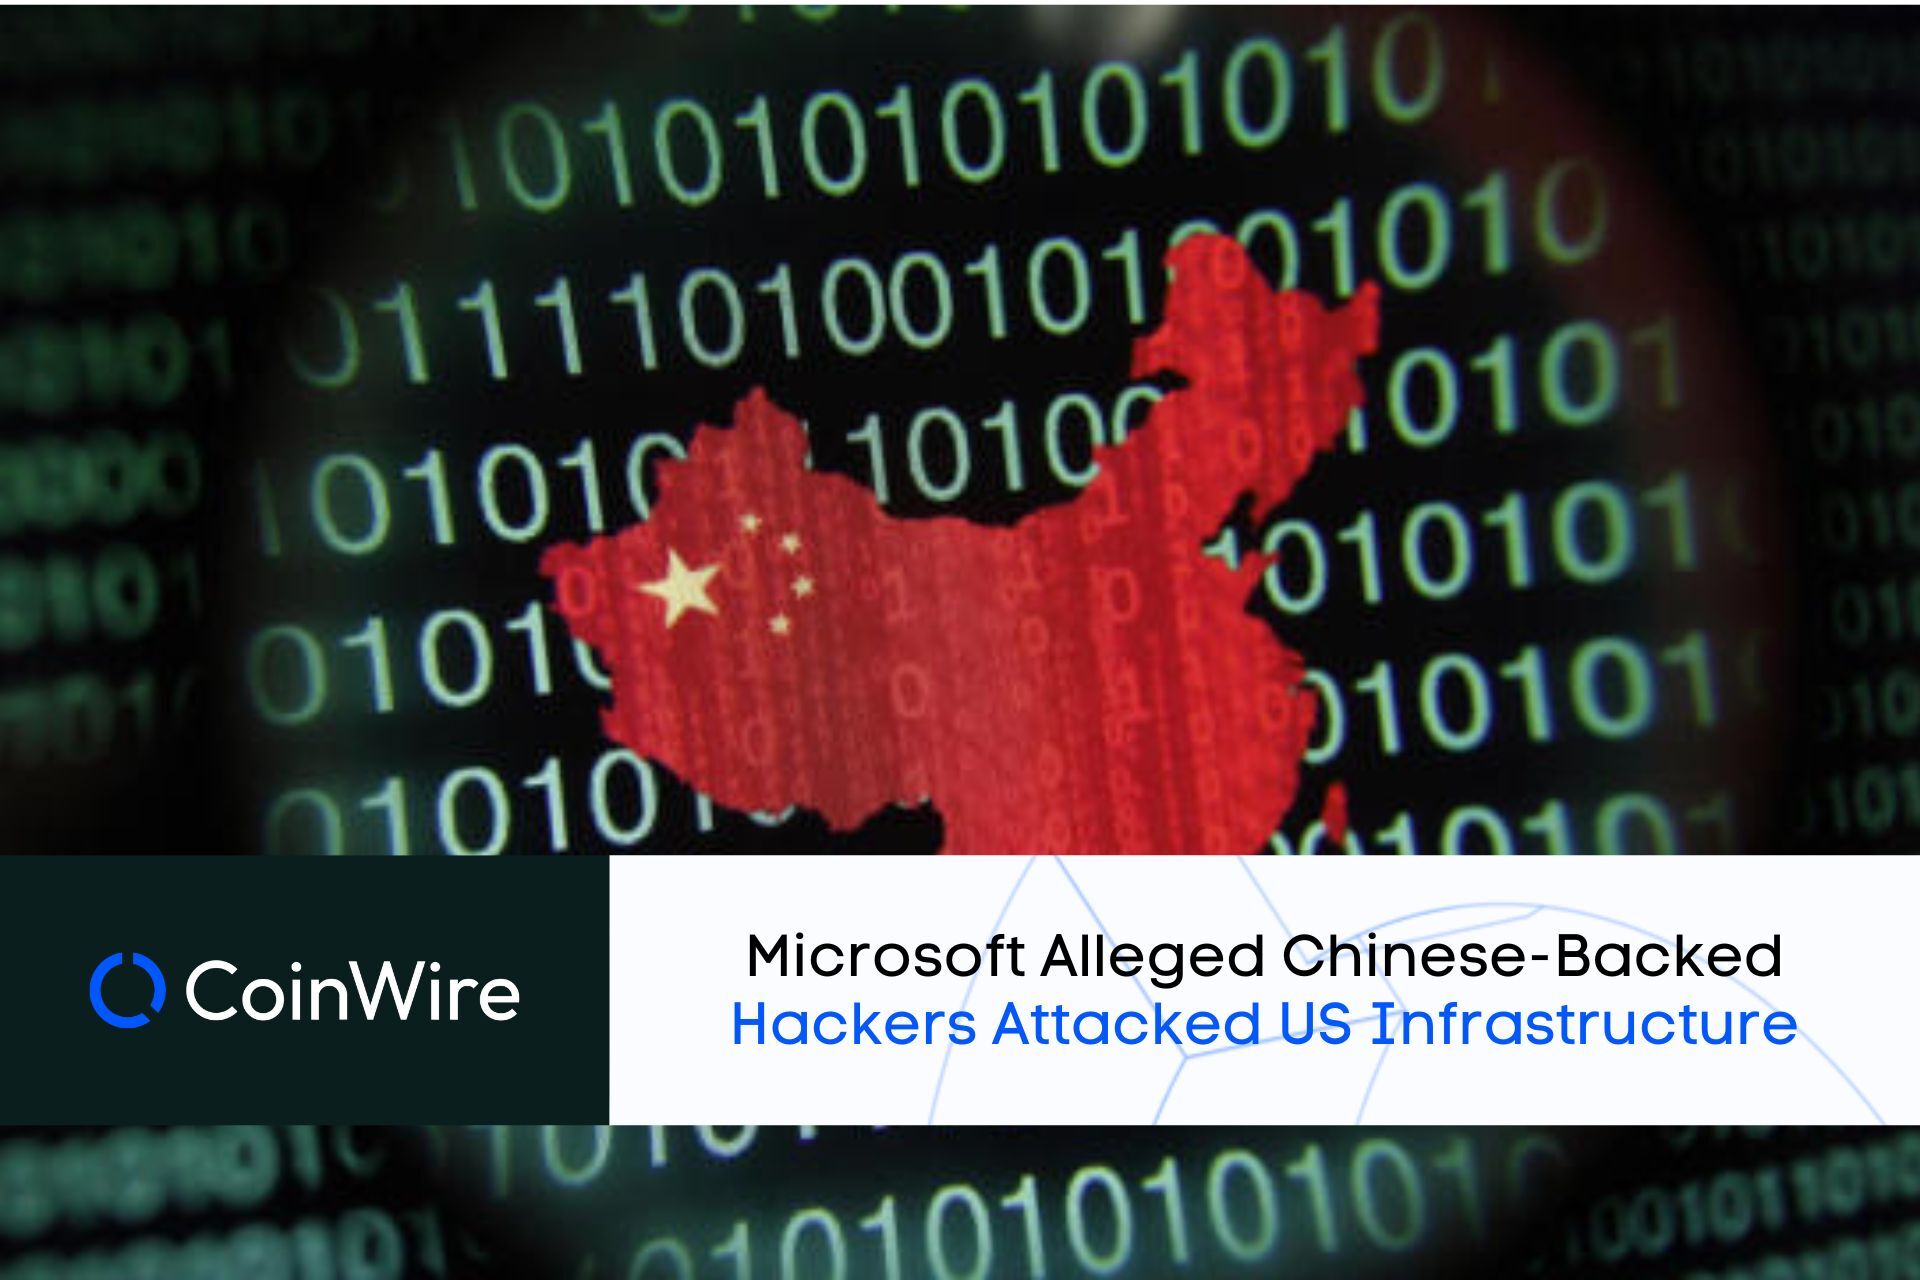 Microsoft Alleged Chinese-Backed Hackers Attacked Us Infrastructure